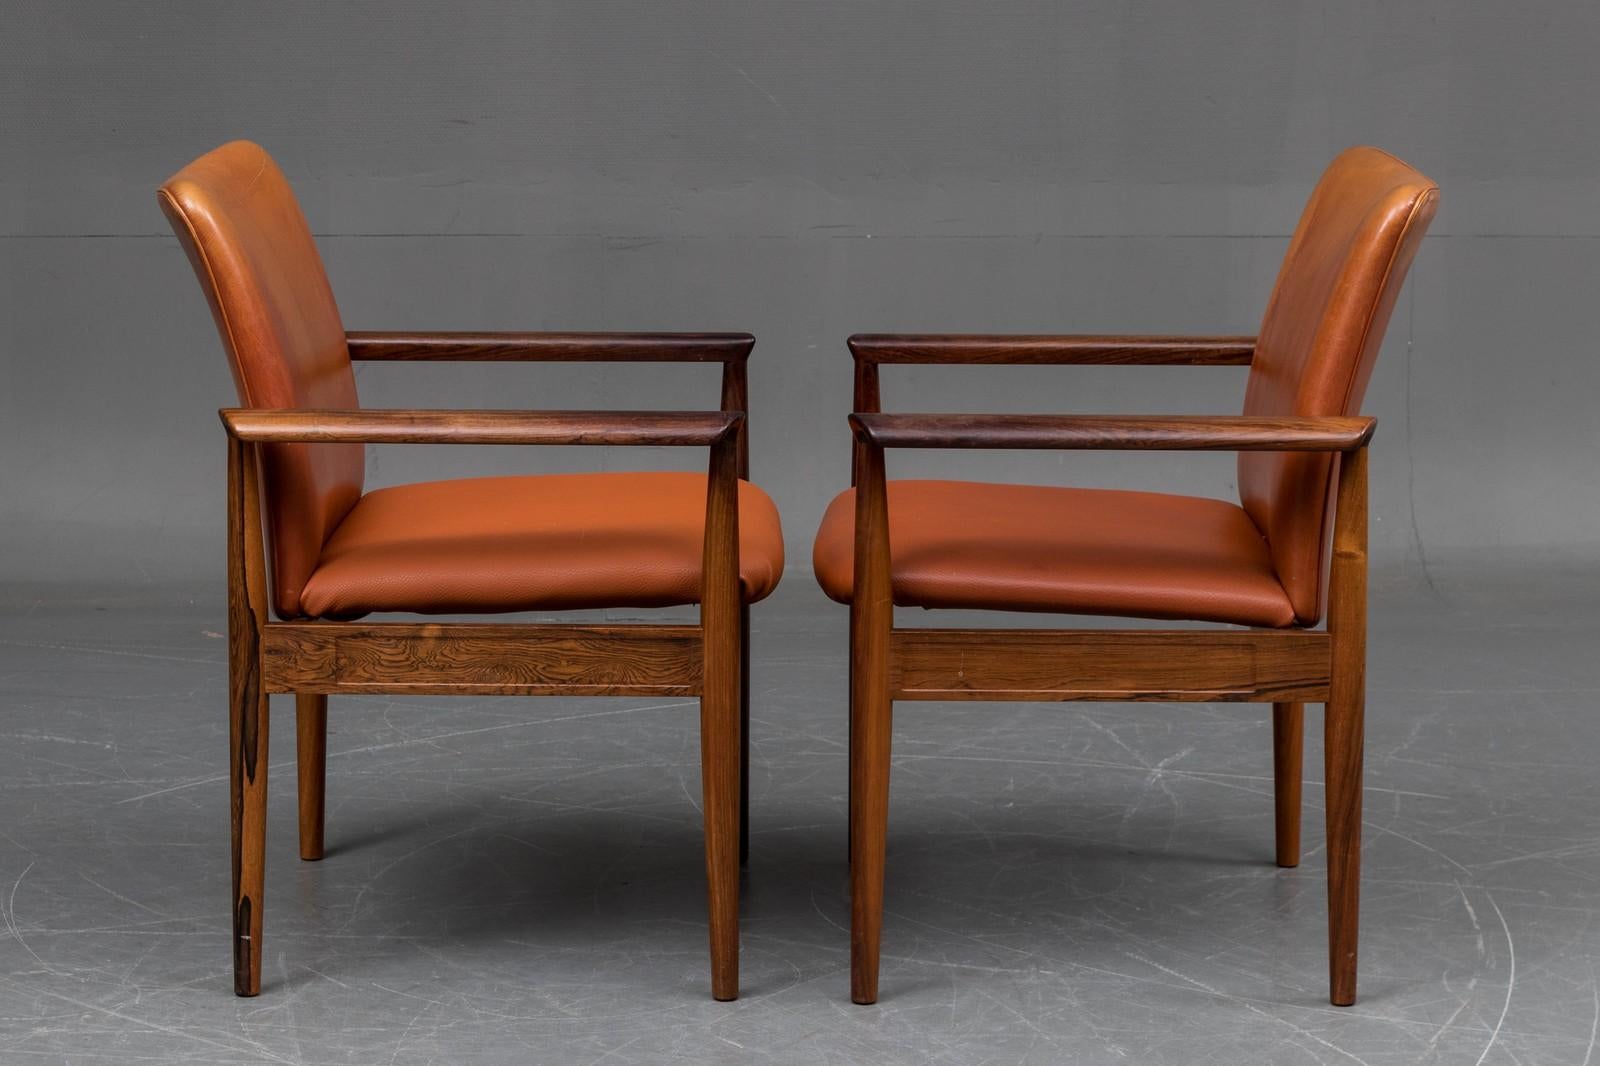 Finn Juhl, diplomat desk chair or armchair with frame in hardwood, new seat upholstery and cover, model 209. Designed in 1963. Produced by France & Son.
Measures: H. 82 cm, SH. 44 cm, B. 69 cm.
Used but still in perfect condition.
 